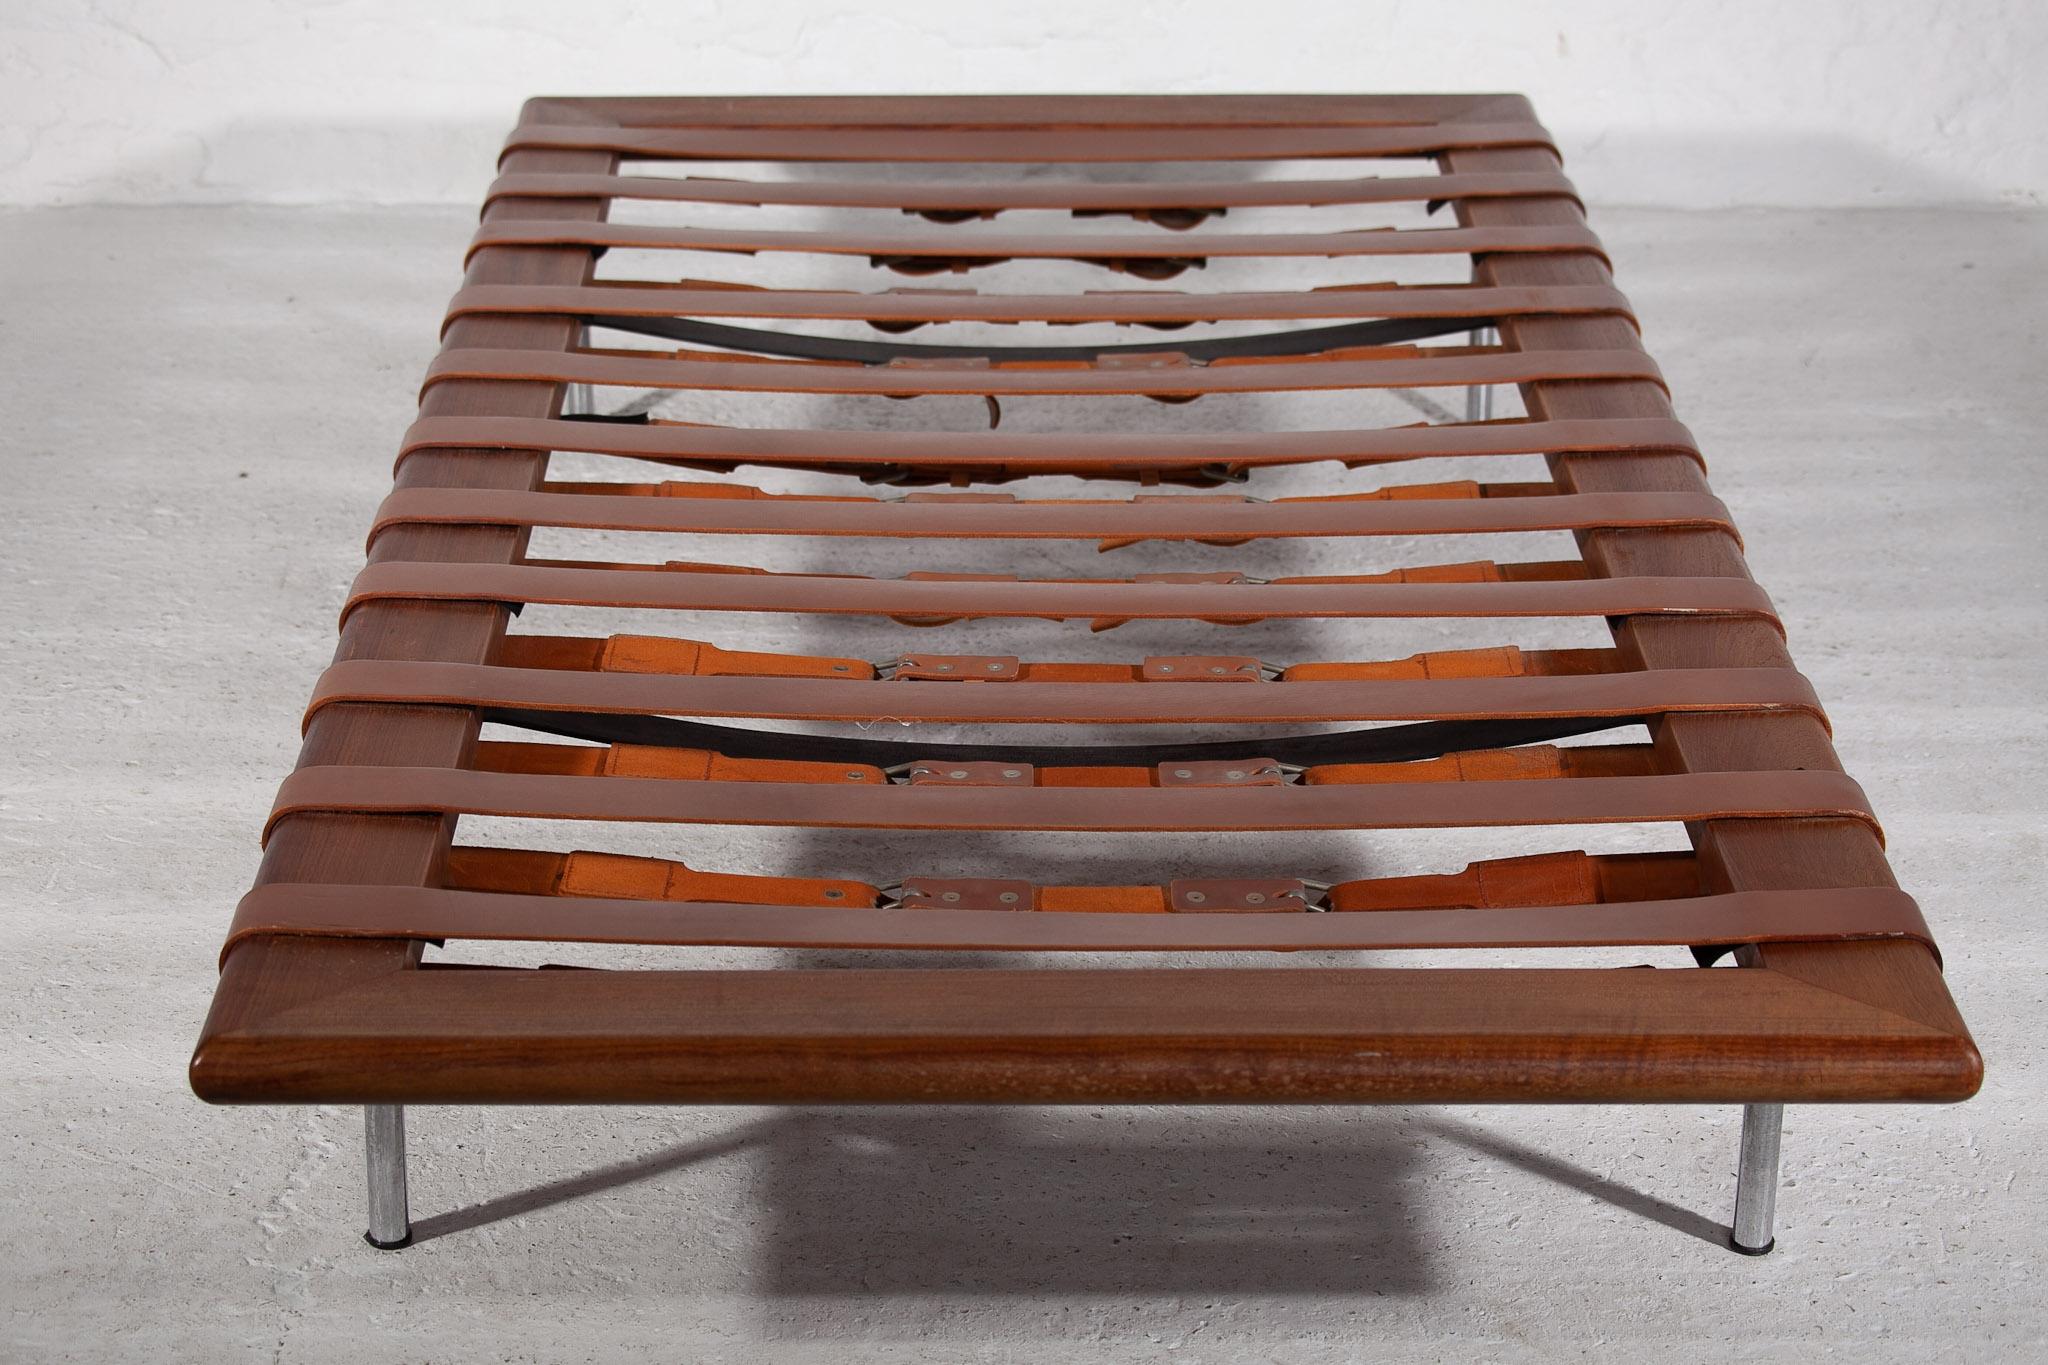 Brown Leather Barcelona Daybed by Ludwig Mies van der Rohe, für Knoll im Angebot 2